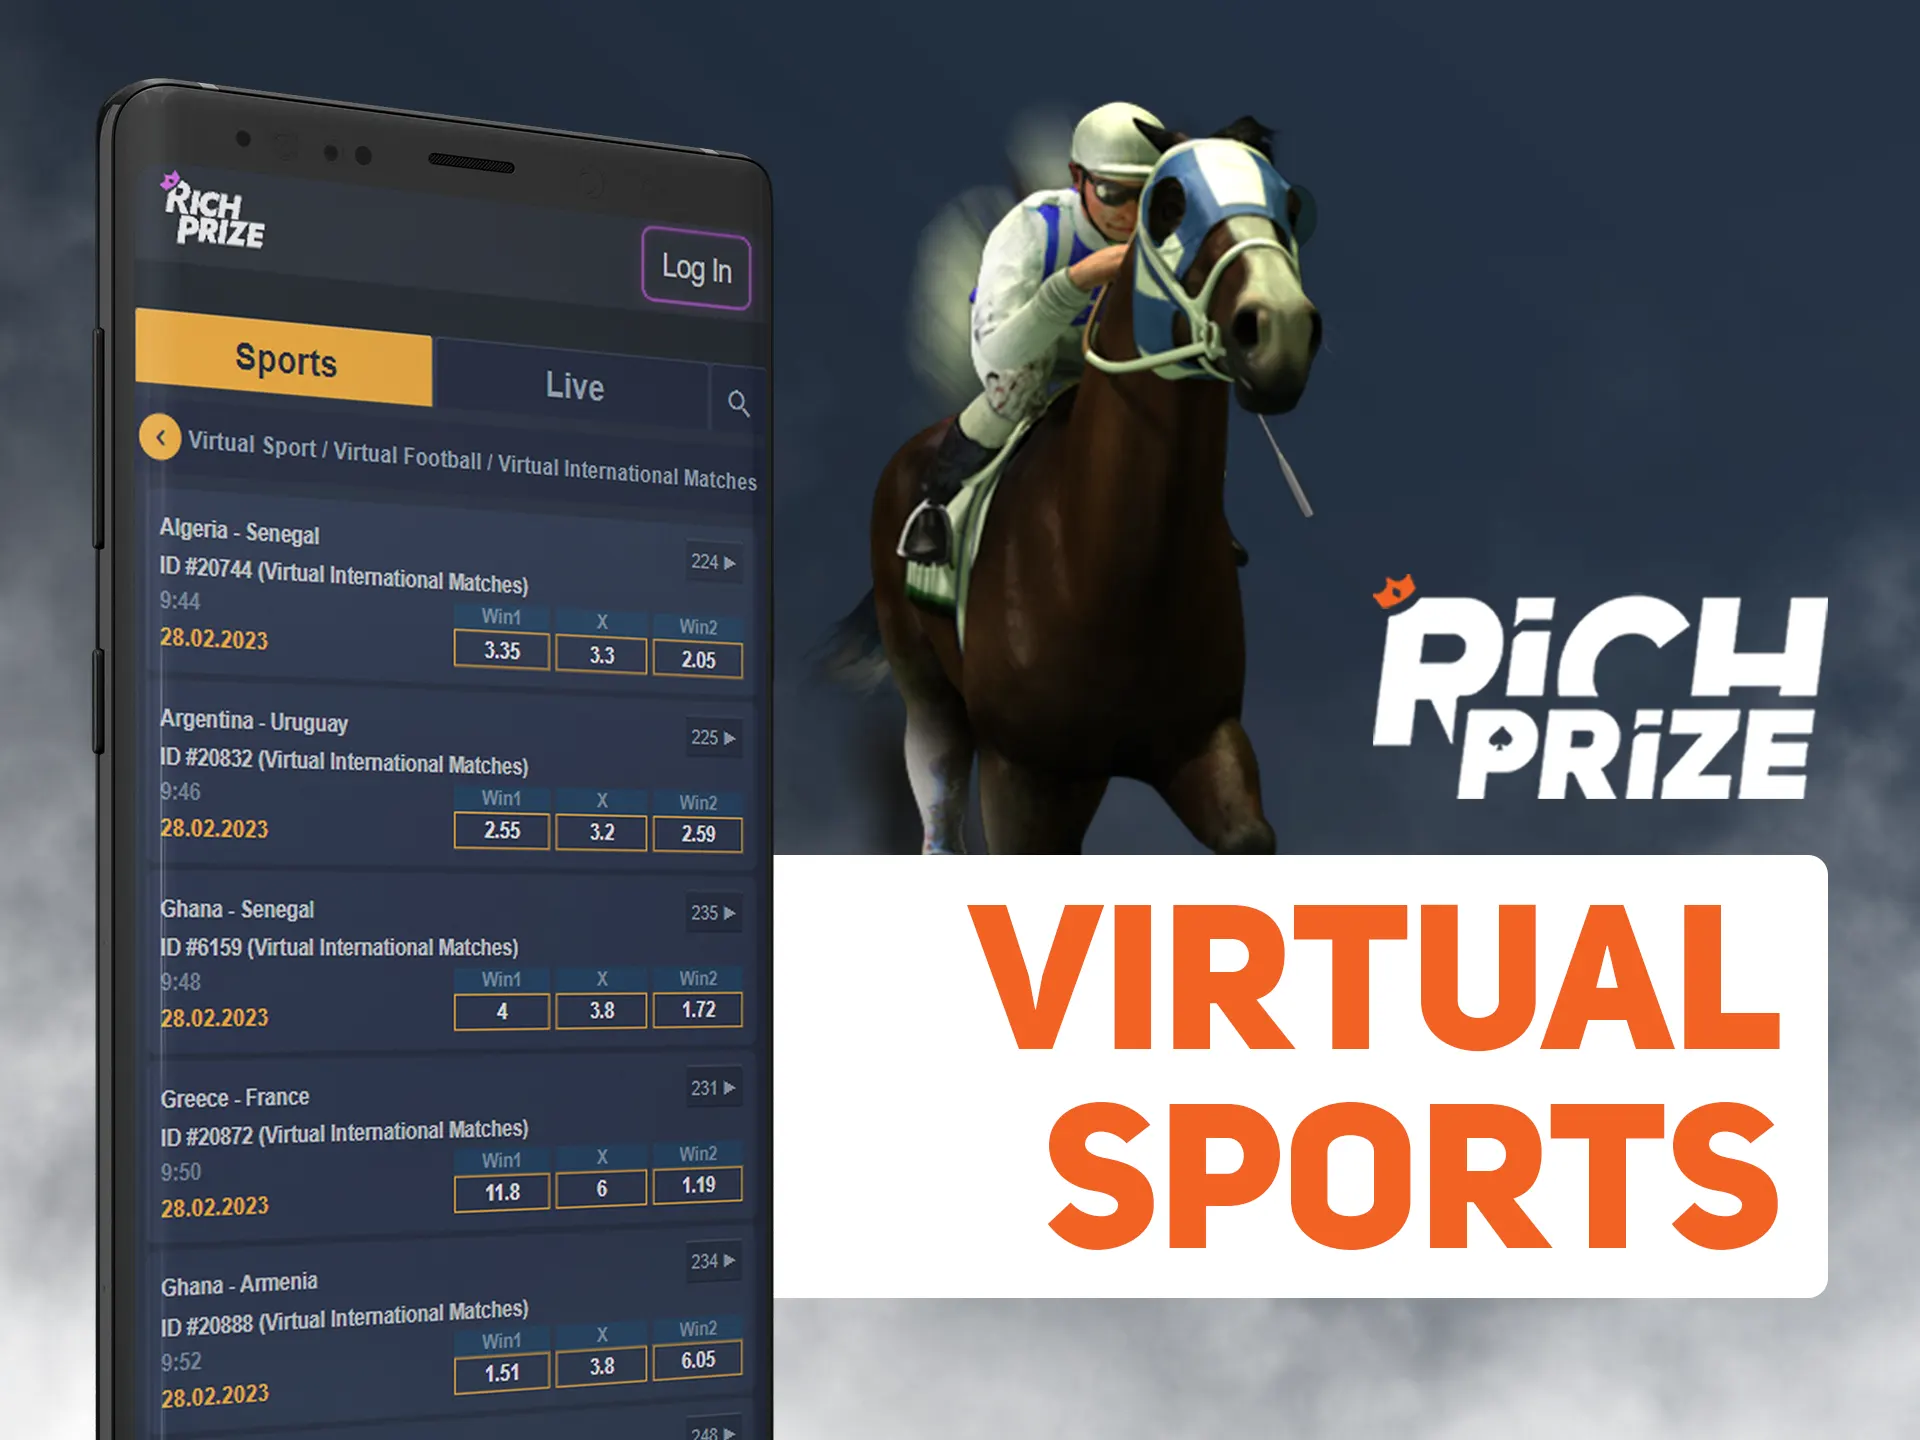 Bet on most intresting virtual sports using Richprize app.